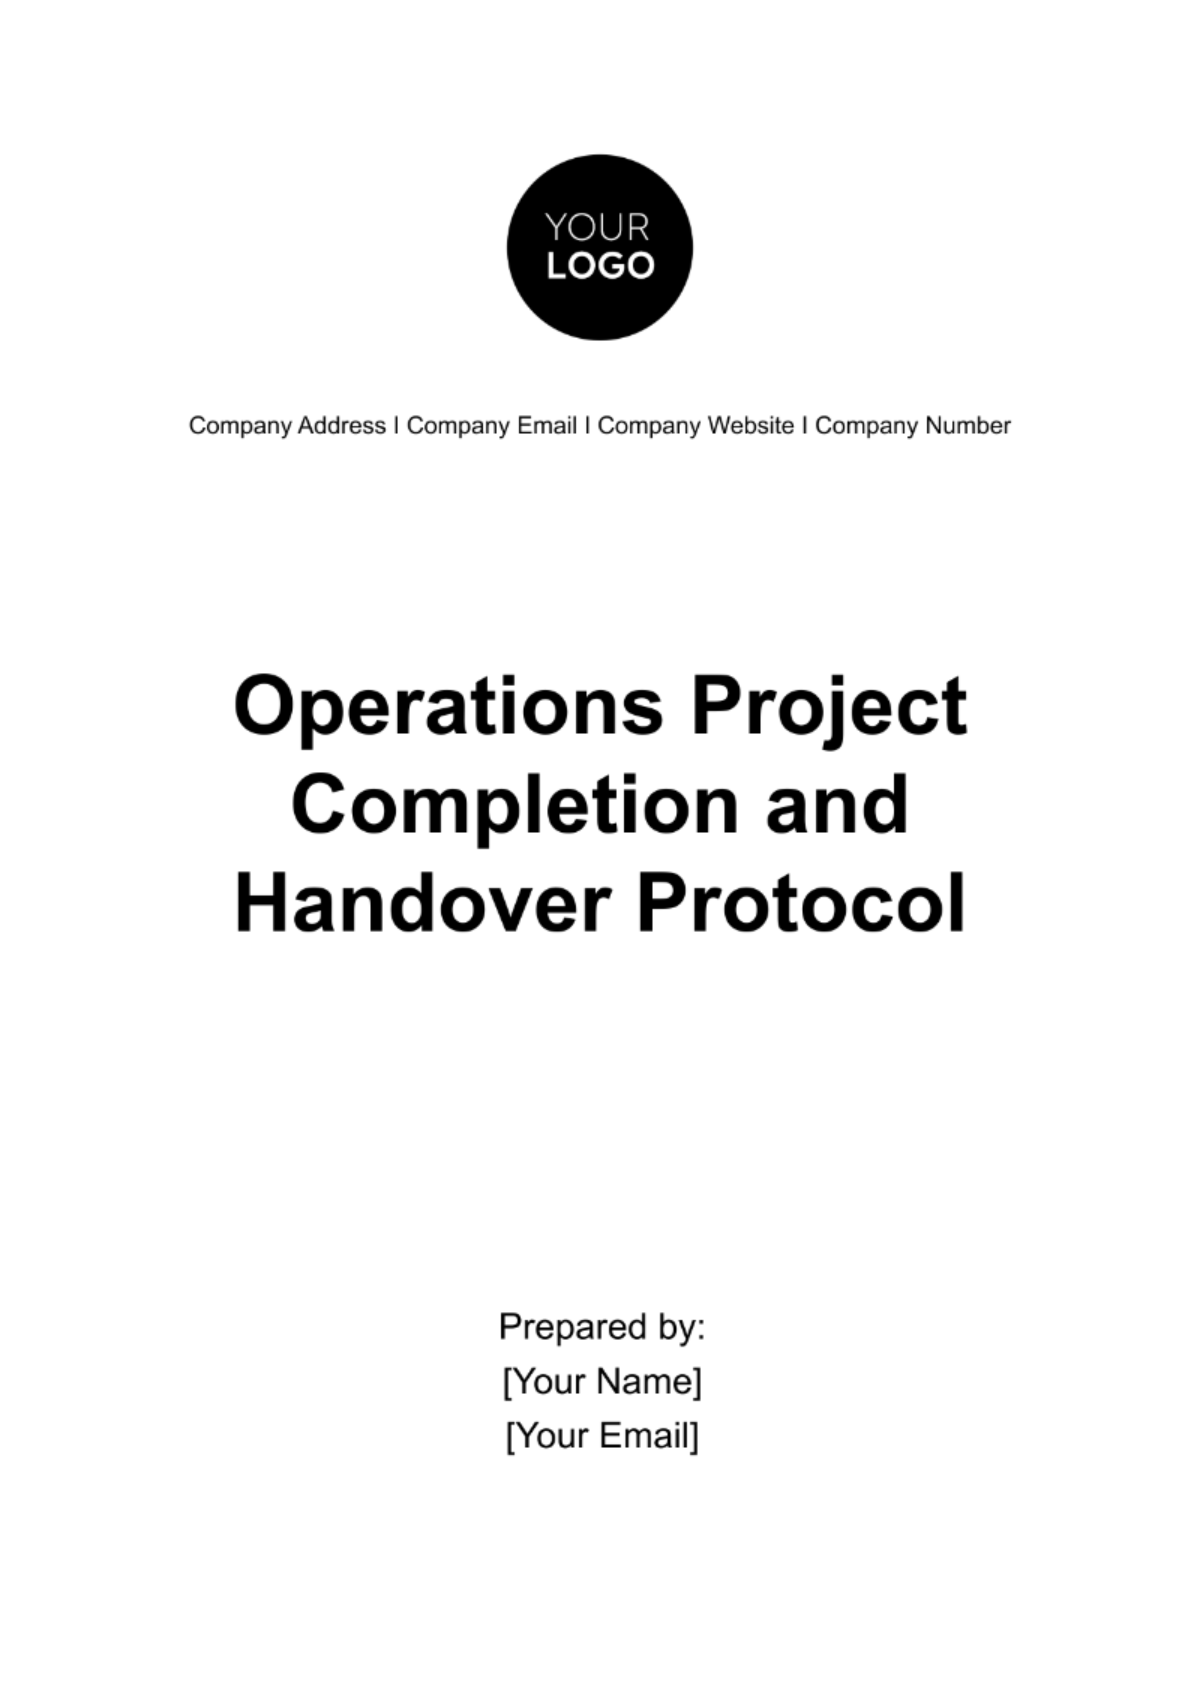 Free Operations Project Completion and Handover Protocol Template